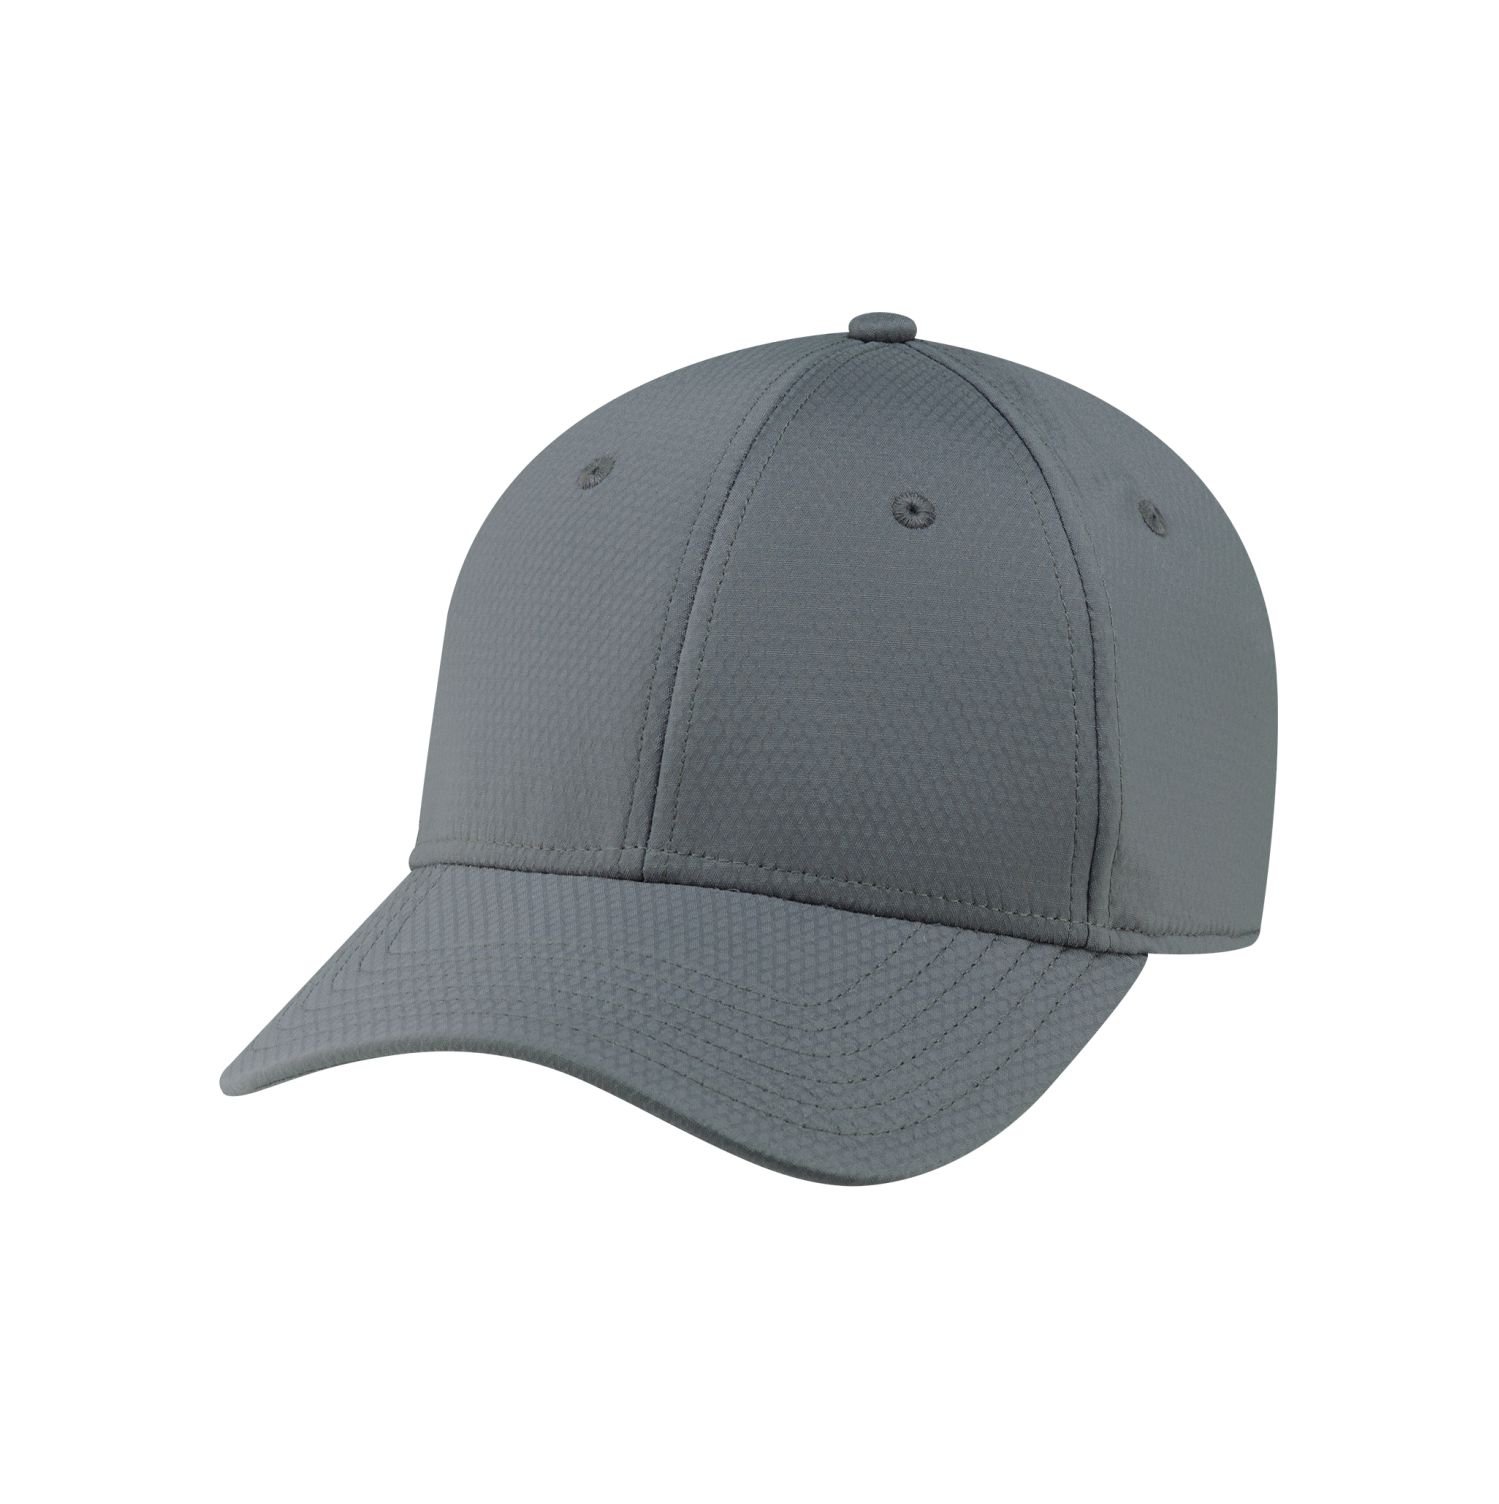 AJM Polyester Diamond & Spandex 6 Panel Constructed Contour Hat #AC0007 Charcoal / Charcoal